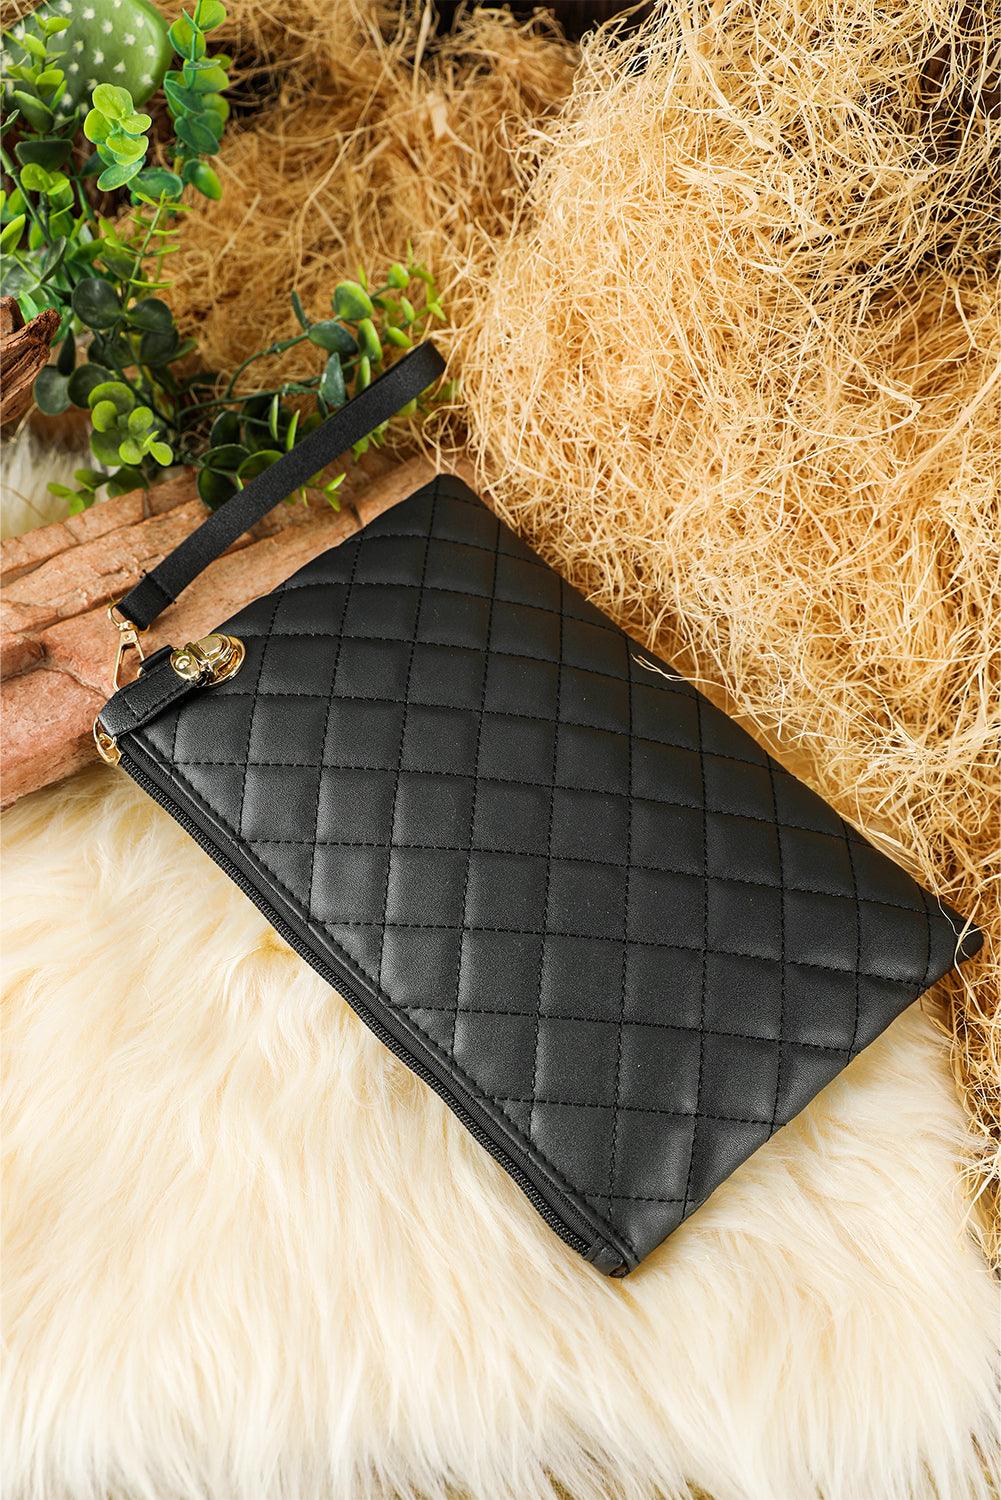 Black Quilted Leather Wallet Bag